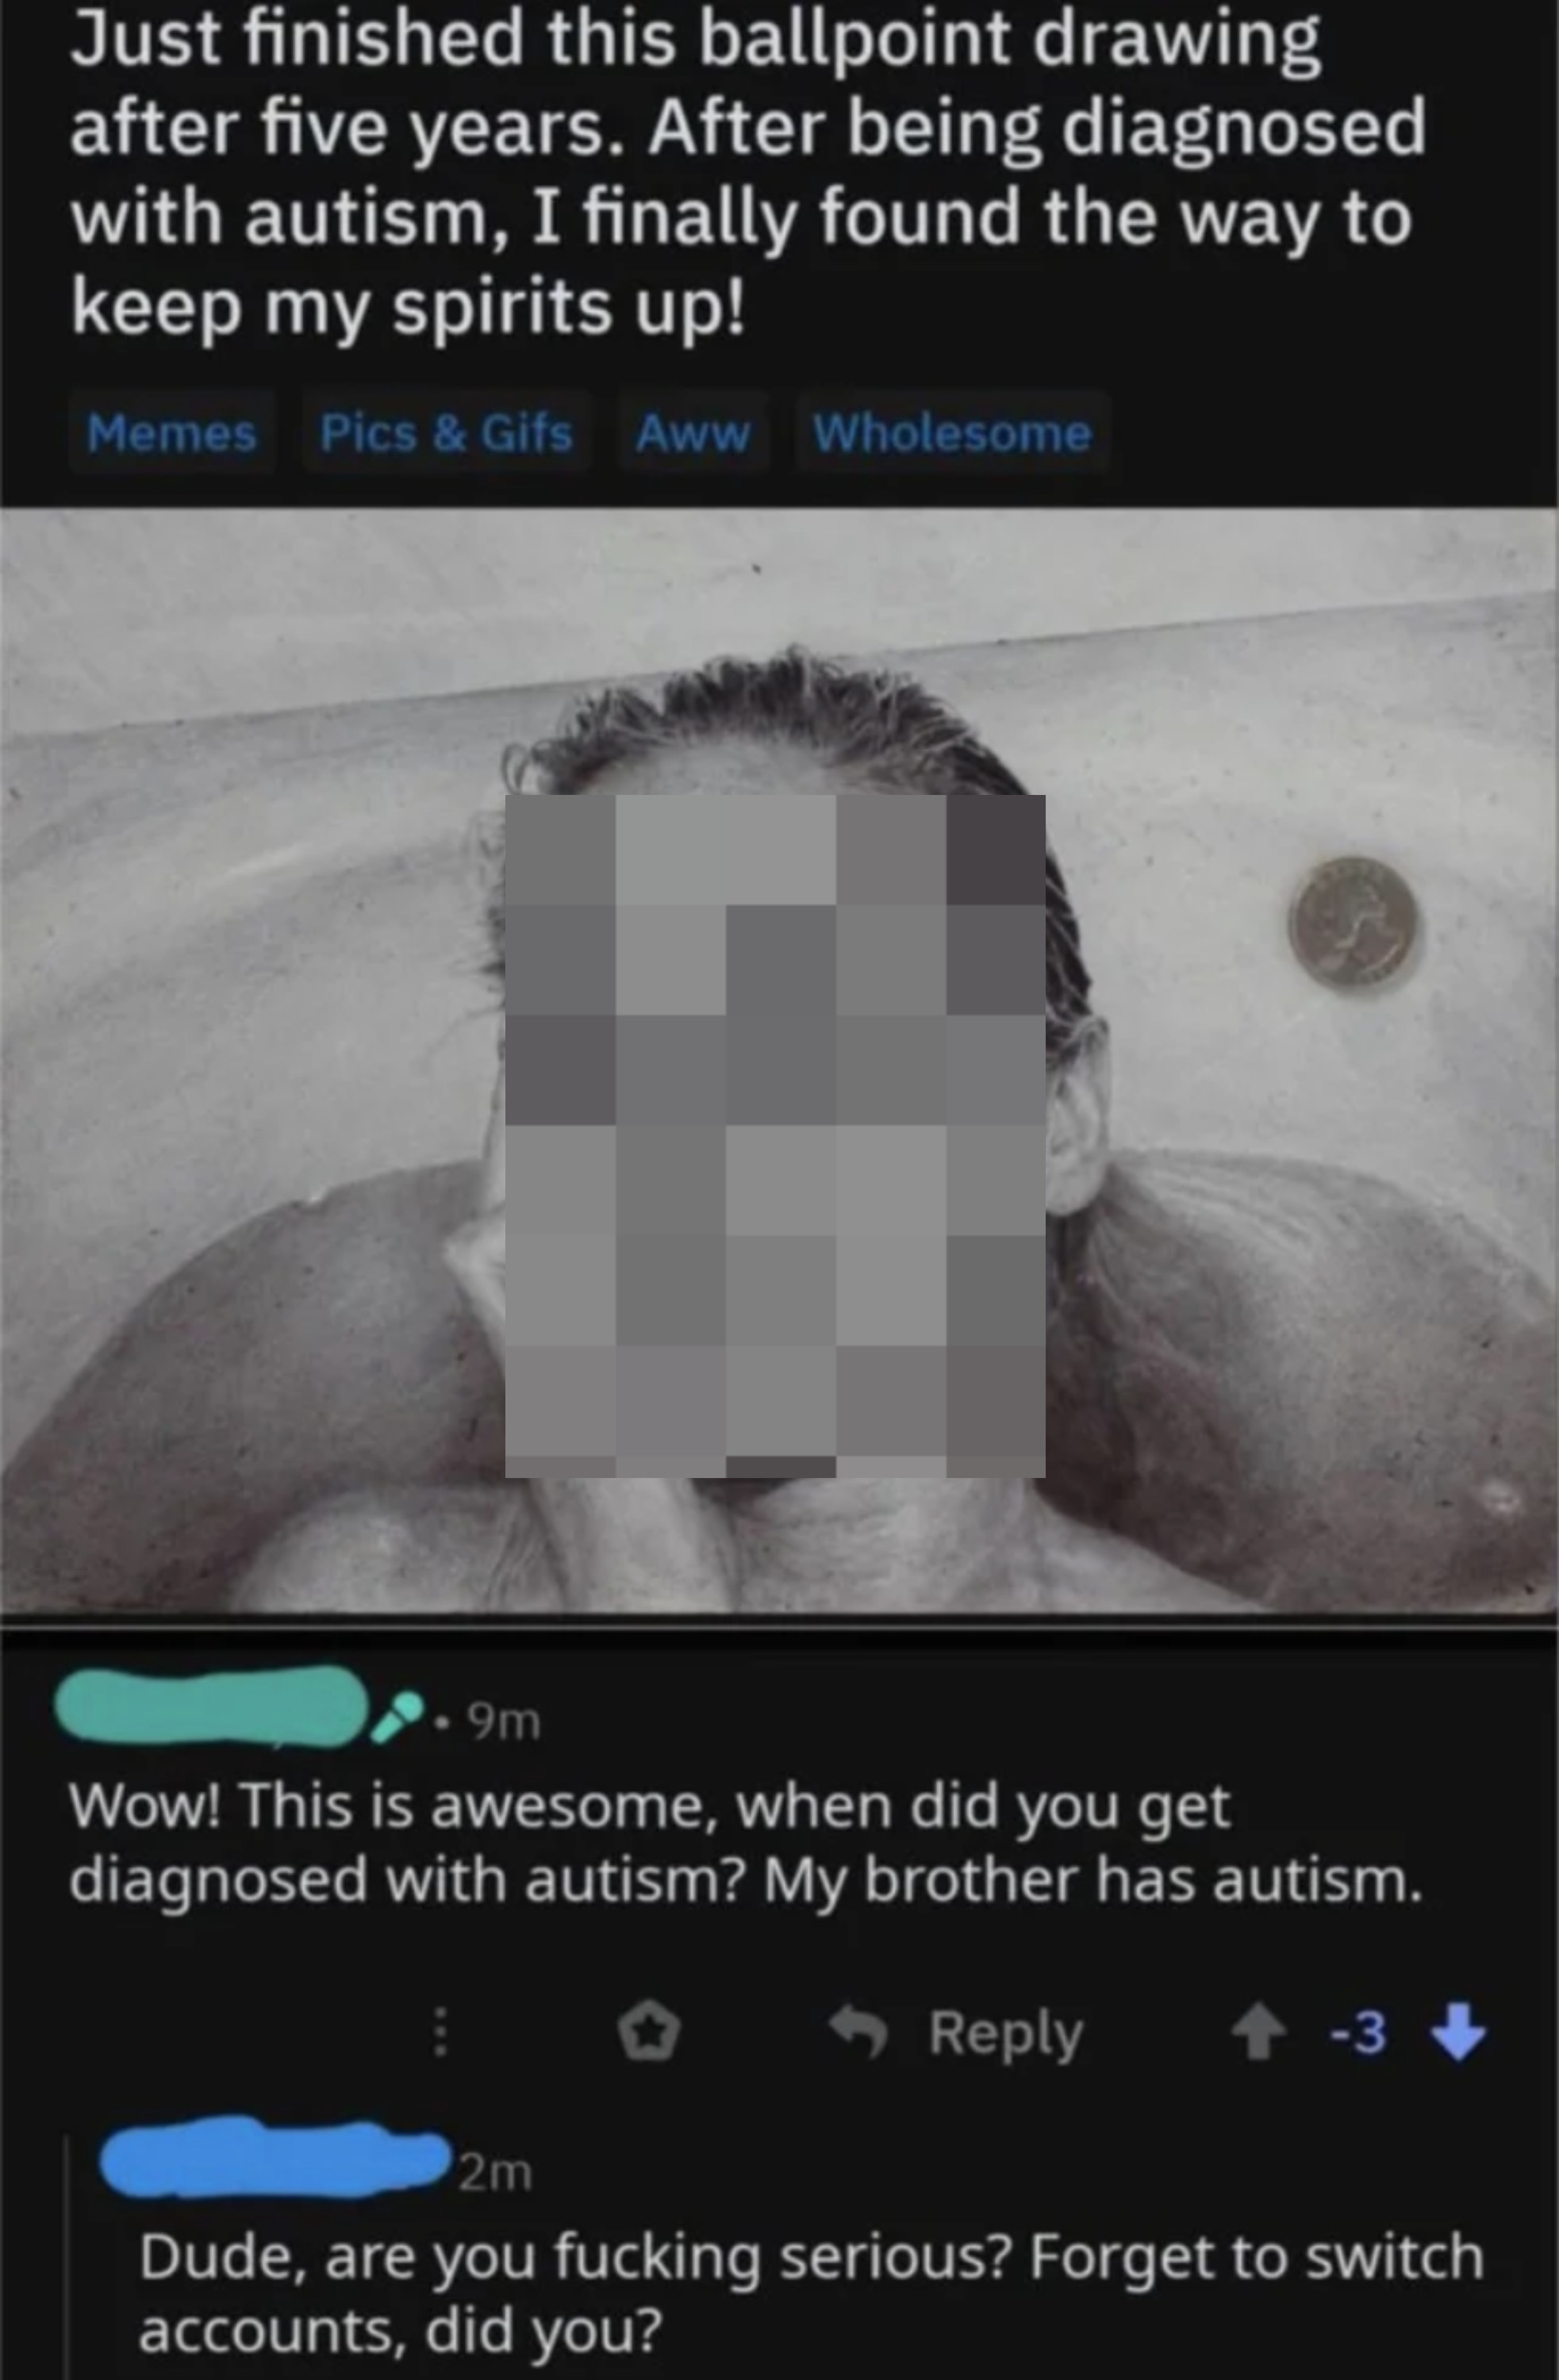 Social media thread of a person claiming to have autism and drawing a picture, with someone saying, &quot;Dude, are you fucking serious? Forget to switch accounts, did you?&quot;